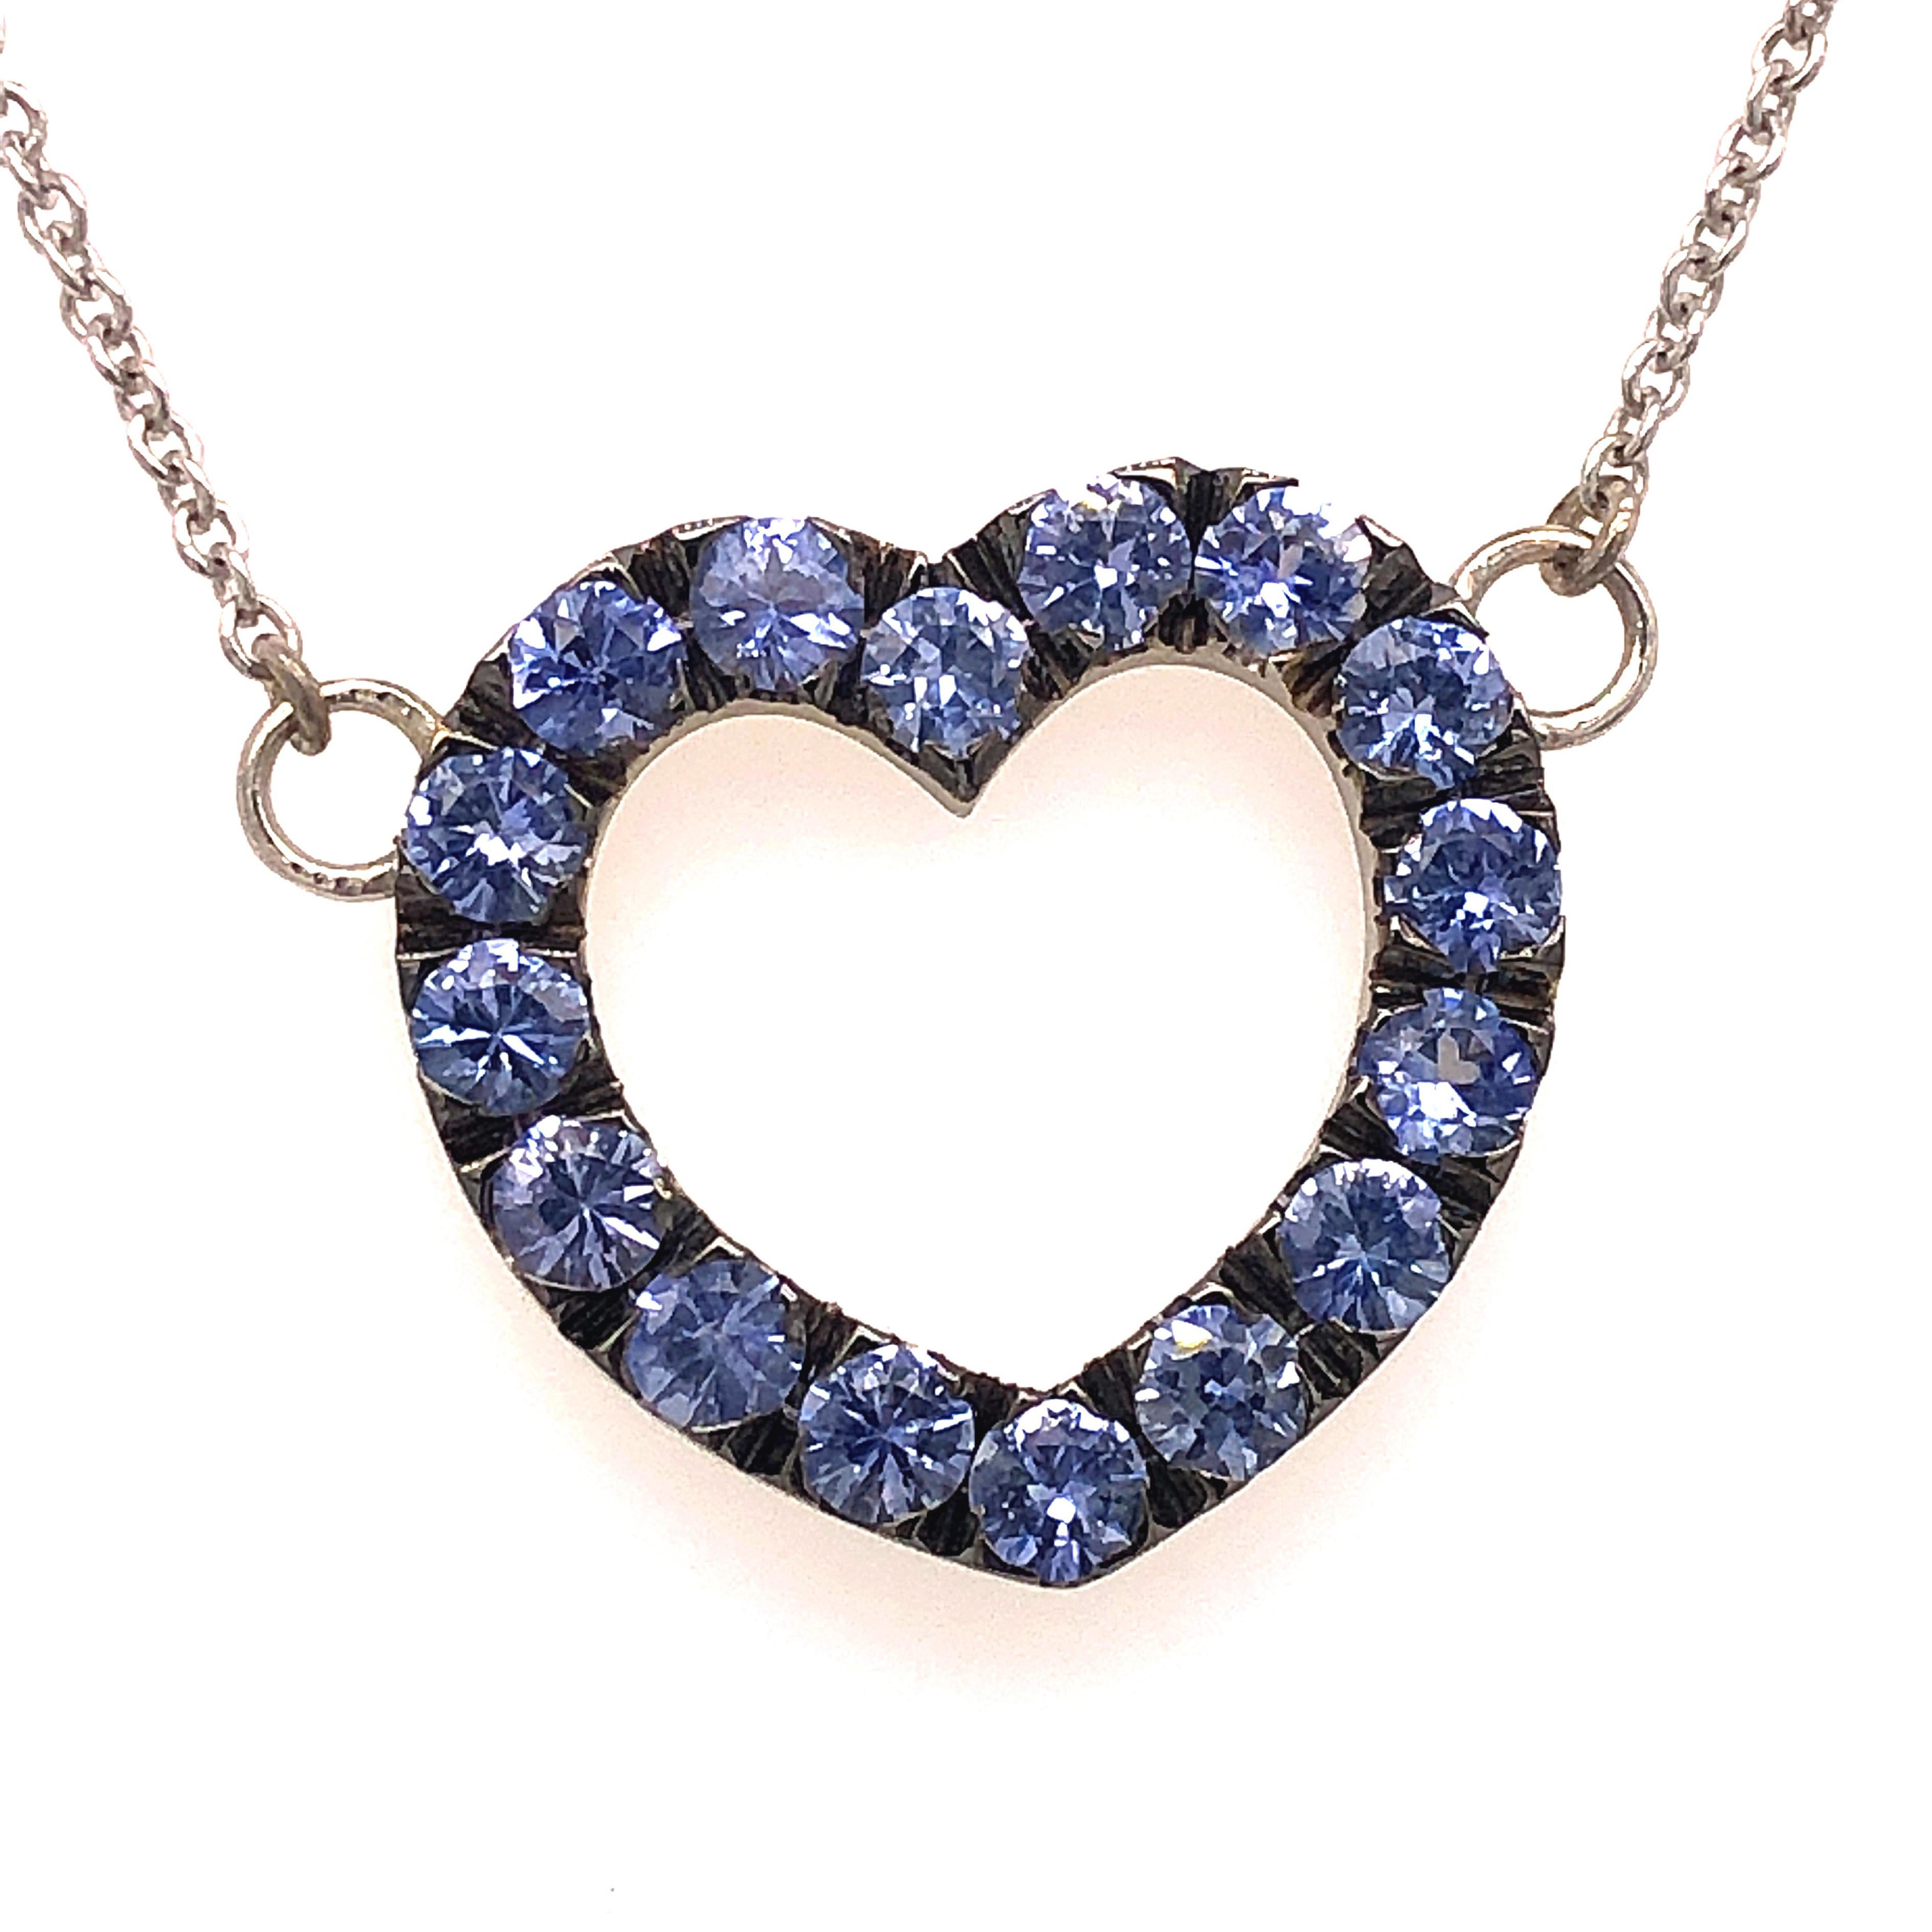 Unique, Chic yet Timeless 1.80 Carat, 16 Round Brilliant Cut Natural Blue Ceylon Sapphire Pendant in a mesmerizing 18Kt Black Rhodium Plated White Gold Setting in a small white gold chain.
A Morning to Night jewel, a Discrete yet Sumptuos Piece